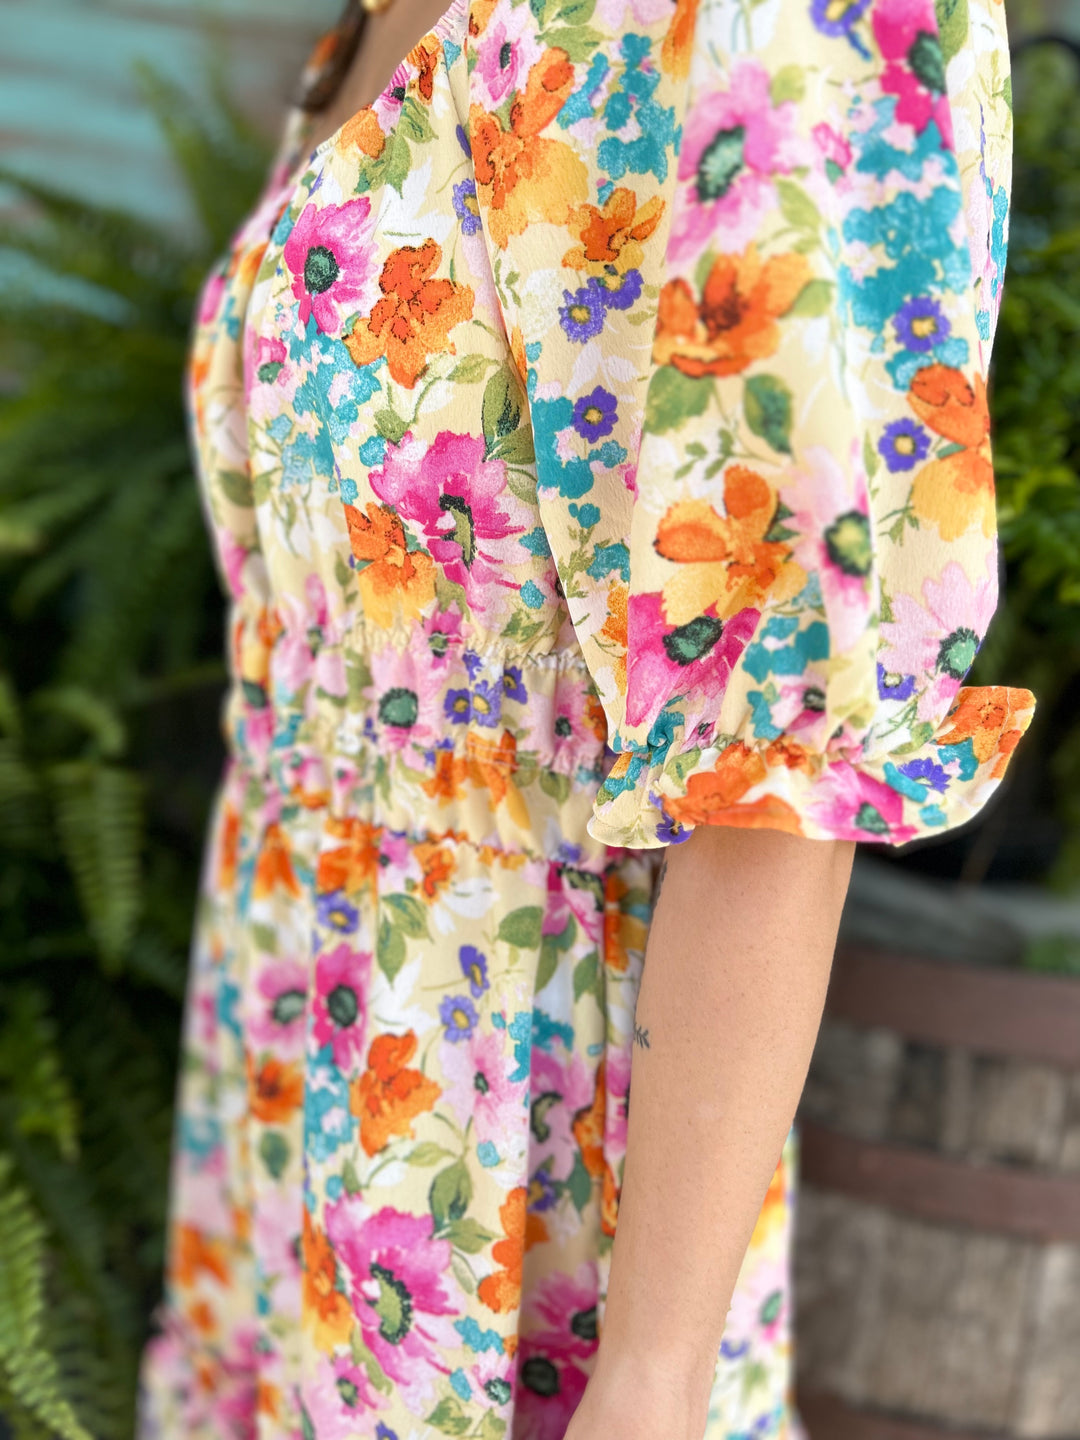 Chiffon Floral Midi Dress With Square Neckline-Dresses-Chris and Carol-Evergreen Boutique, Women’s Fashion Boutique in Santa Claus, Indiana